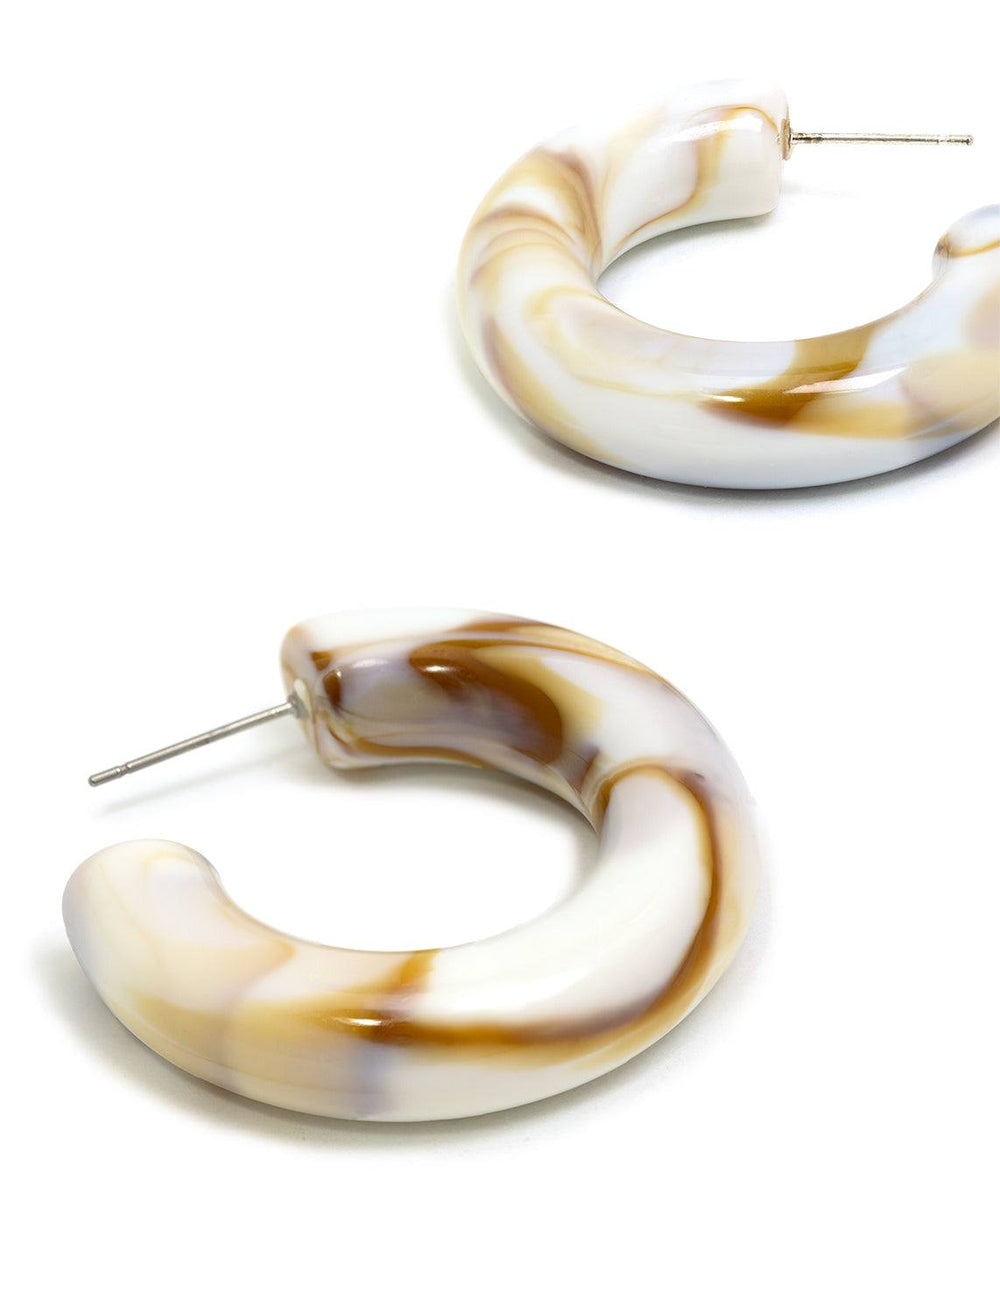 Stylized laydown of St. Armand's latte chunky lucite hoops.